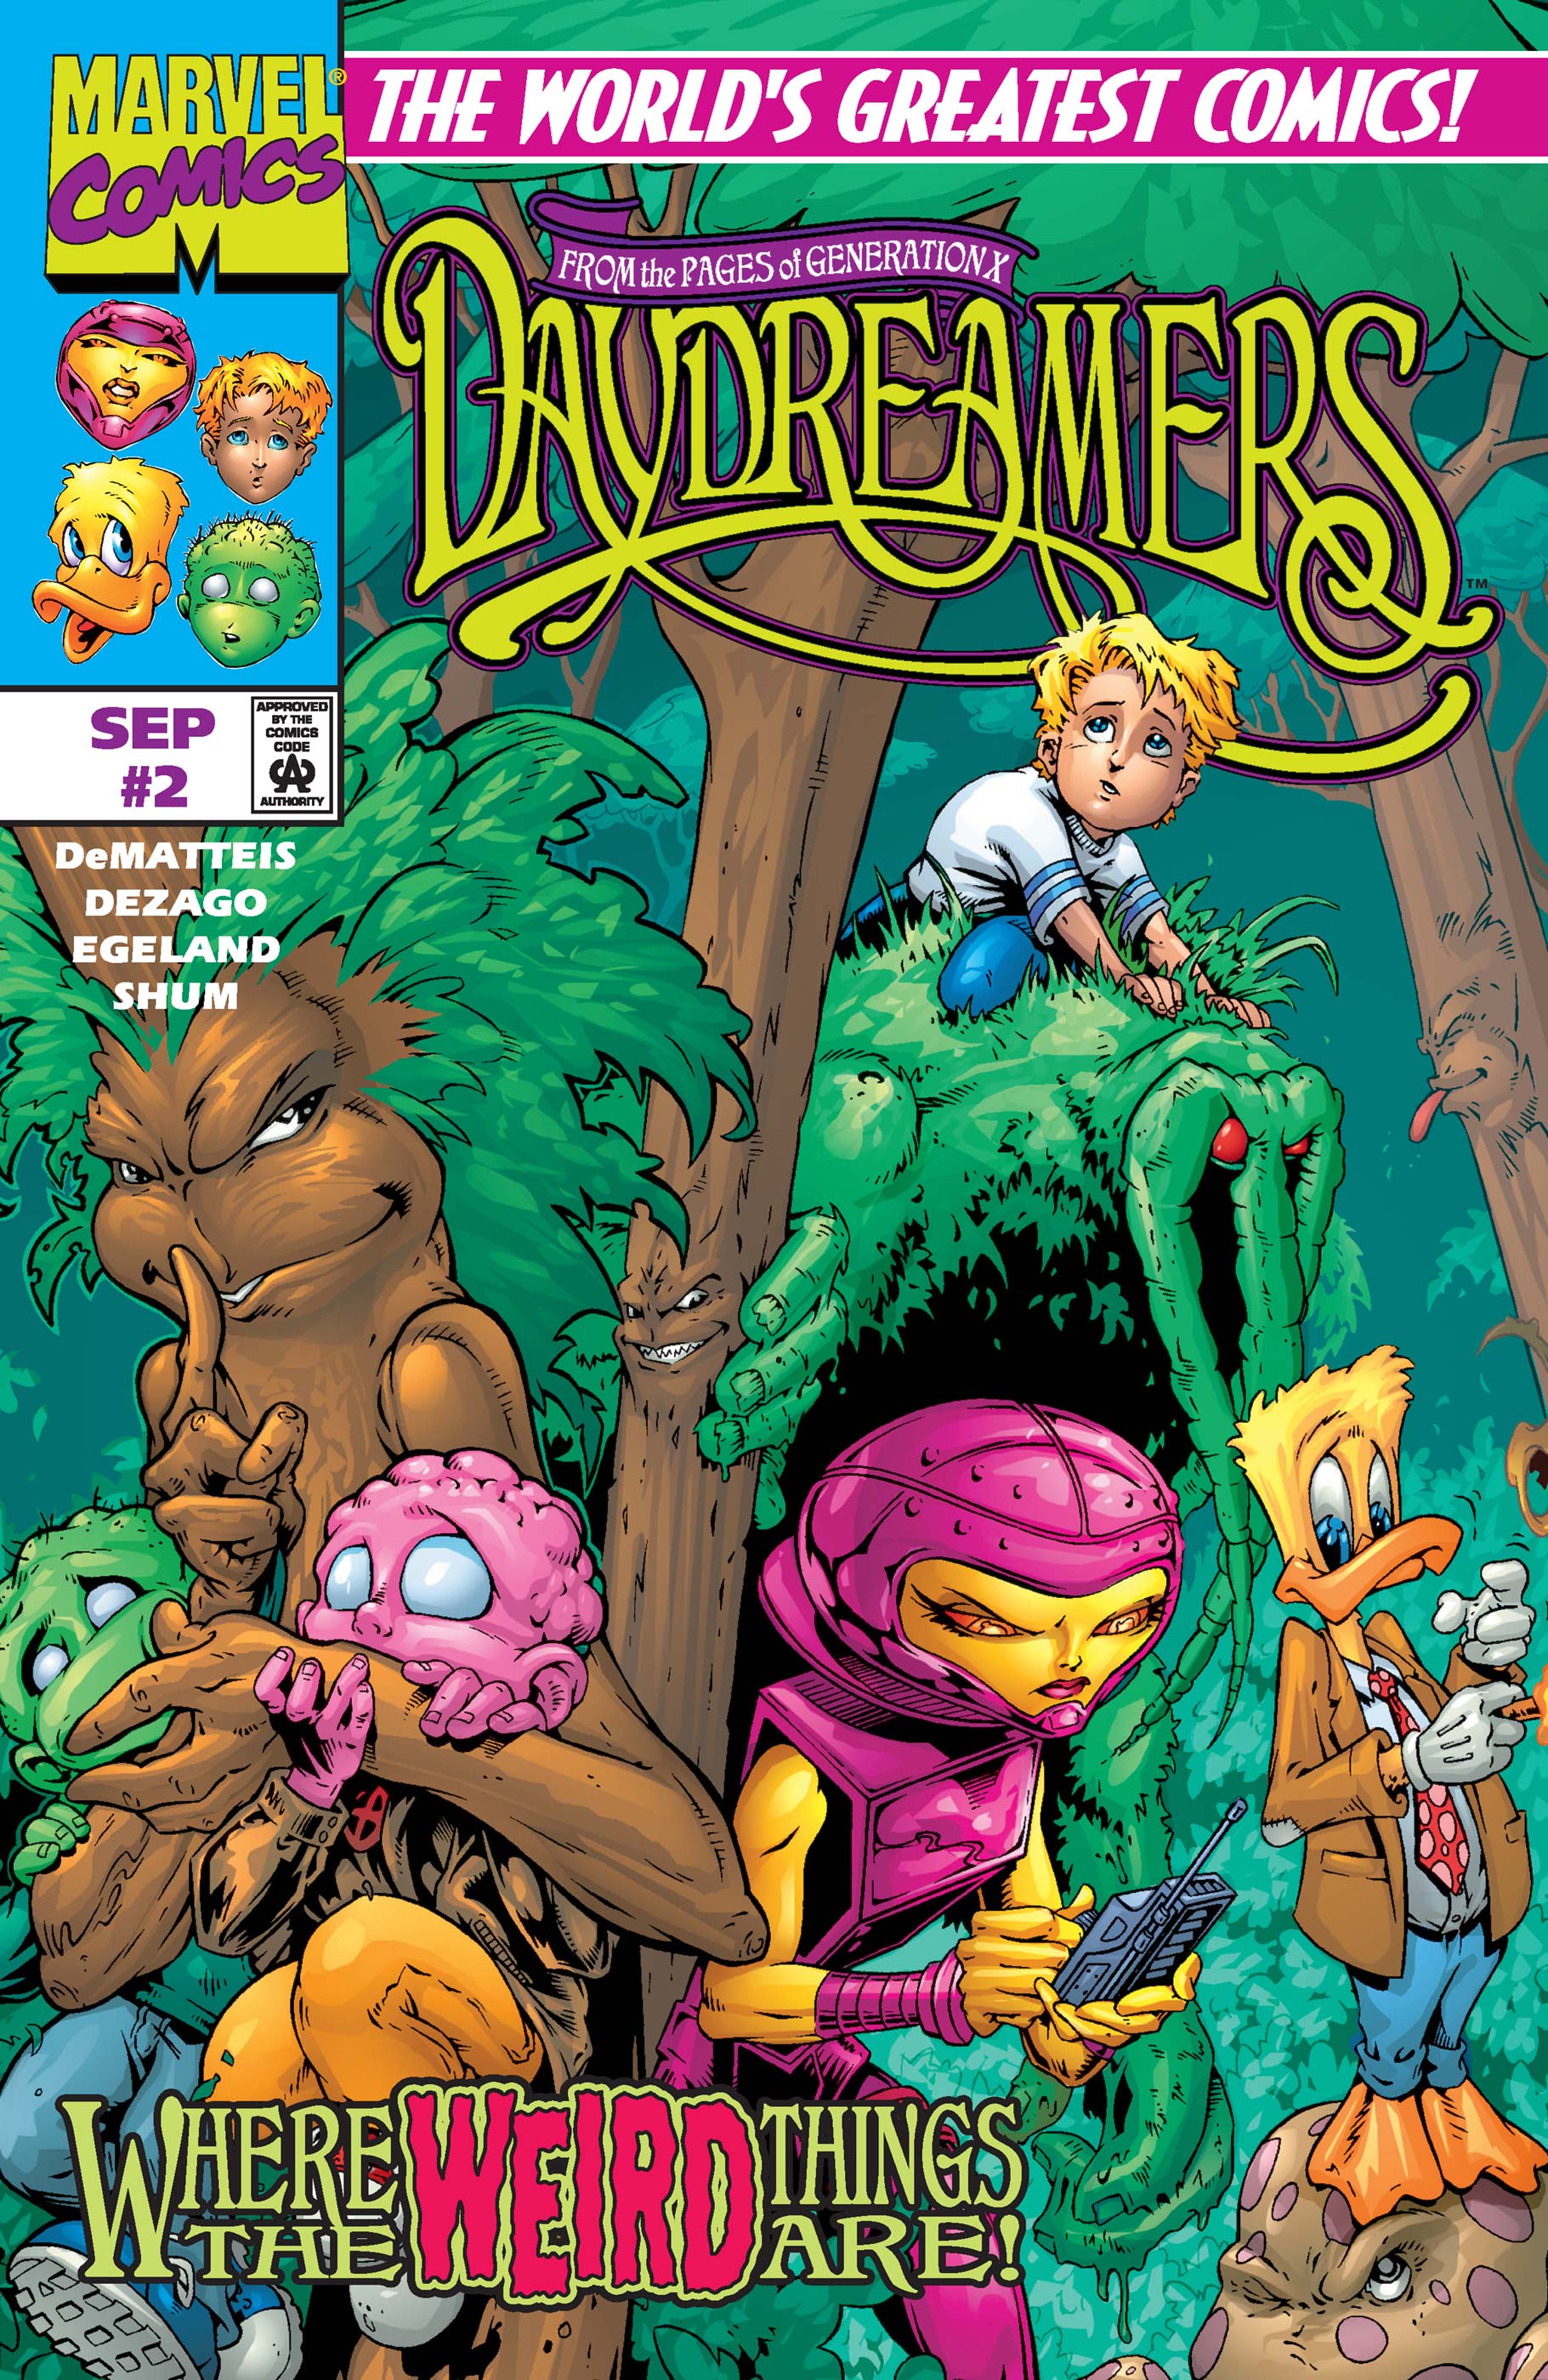 Daydreamers (1997) #2